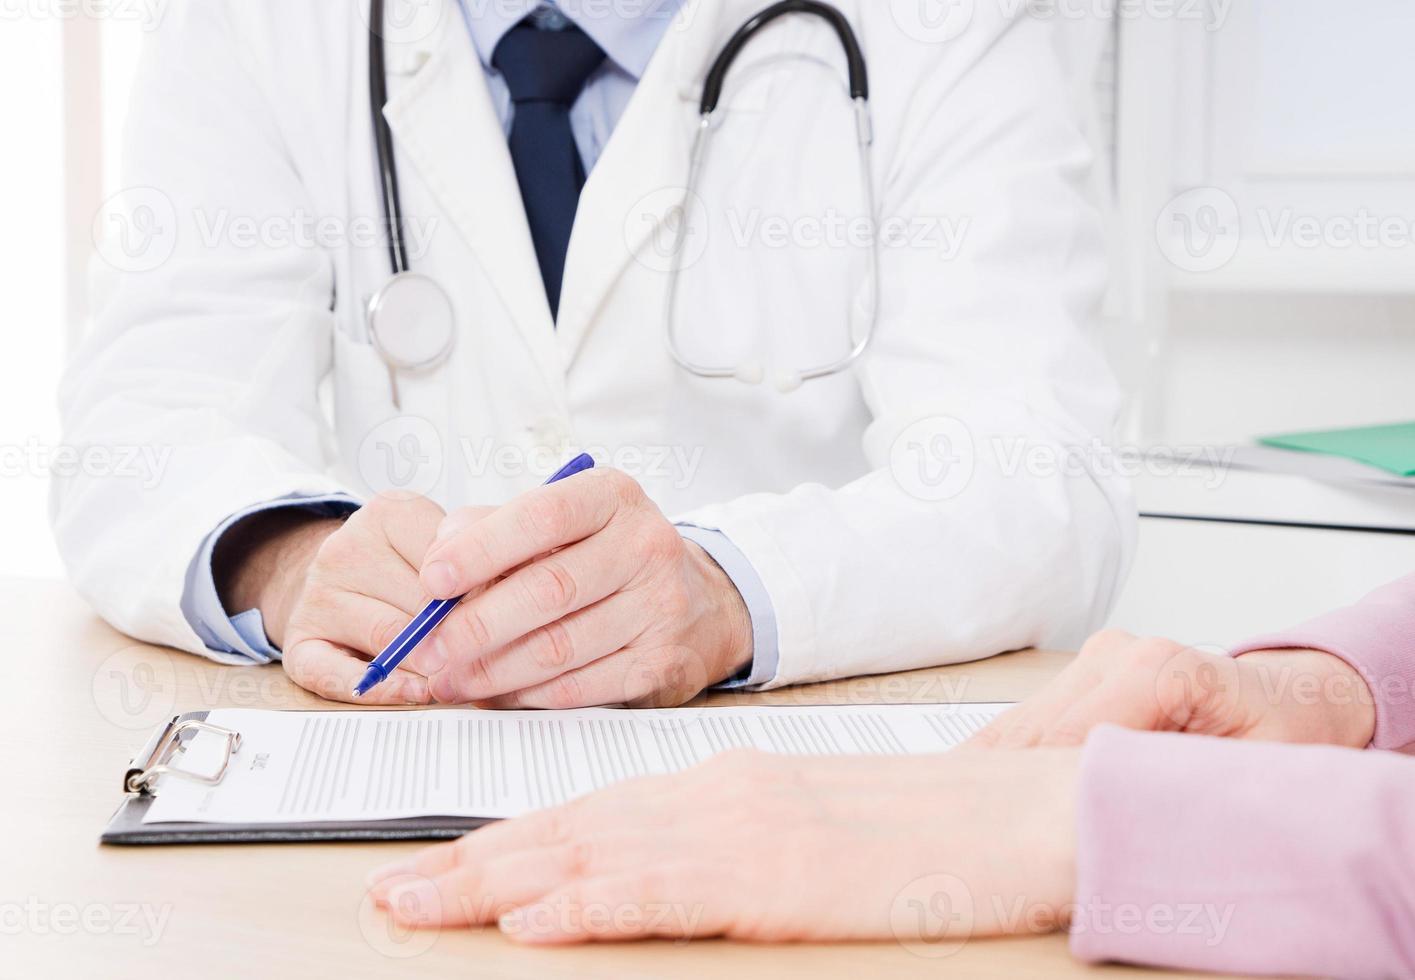 Patient listening intently to a male doctor explaining patient symptoms or asking a question as they discuss paperwork together in a consultation photo